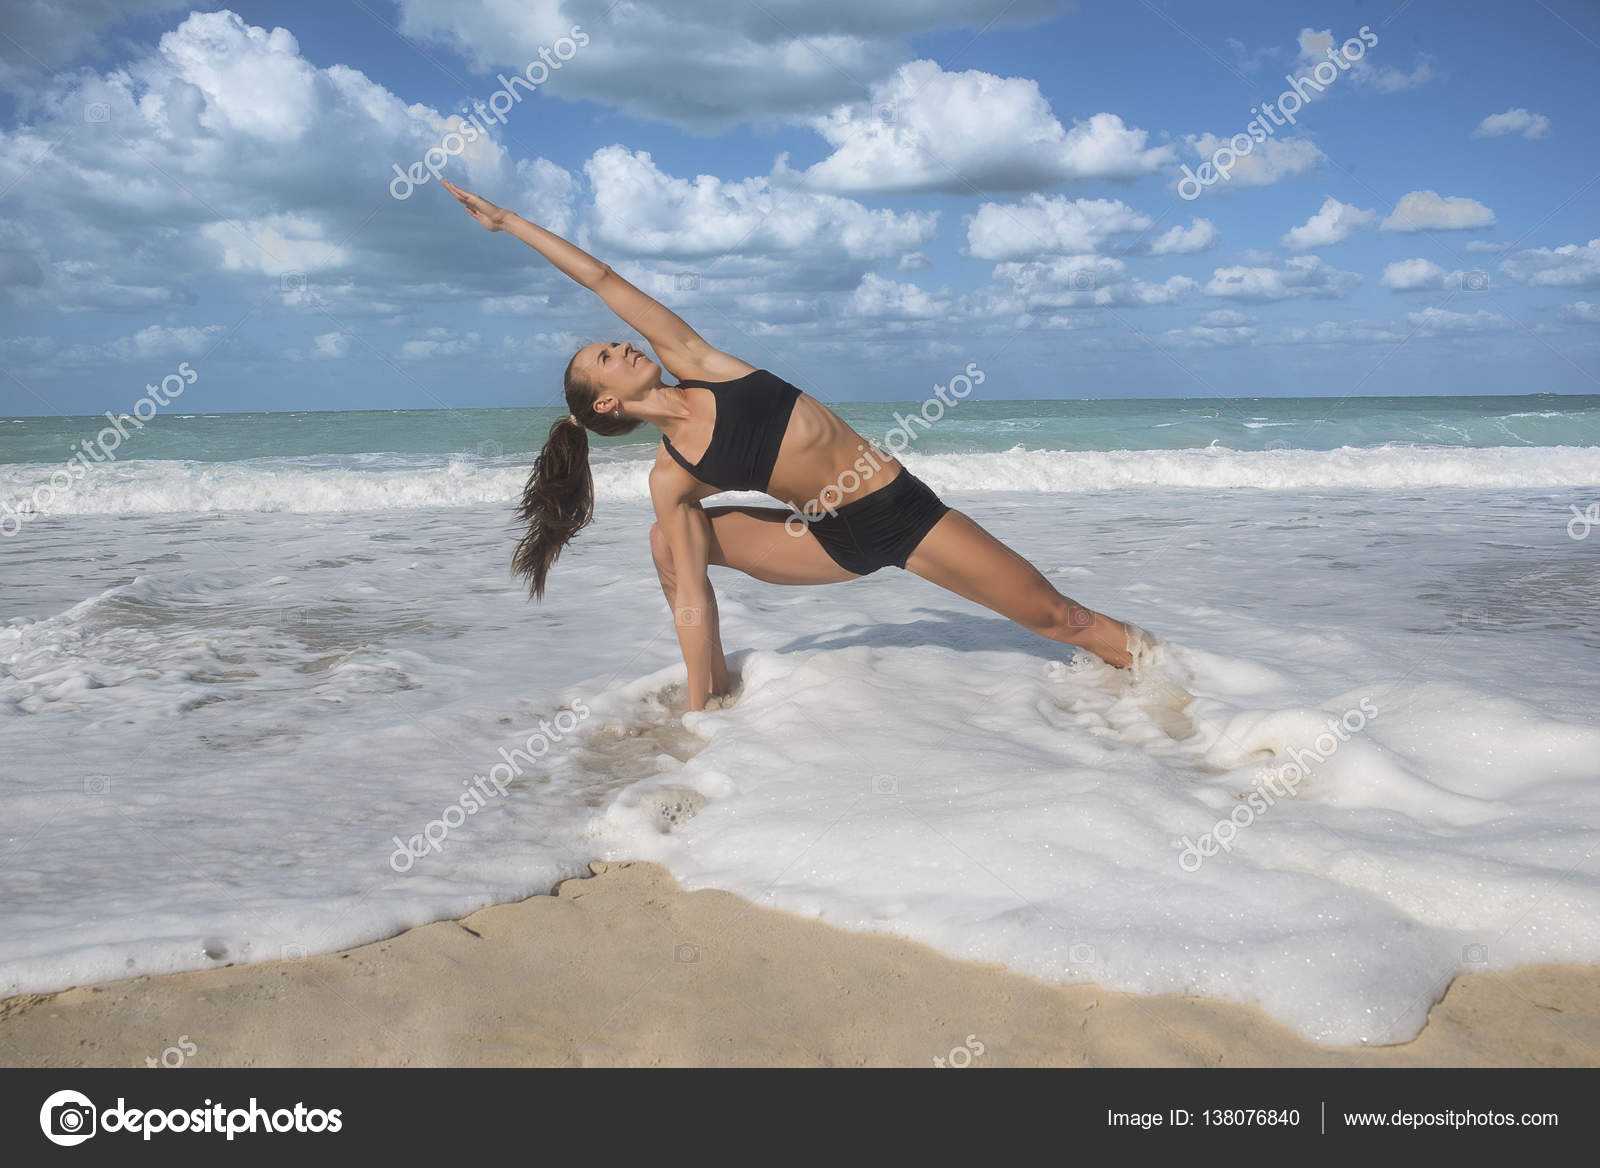 Girl in yoga pose with waves crashing over her legs on beach Stock